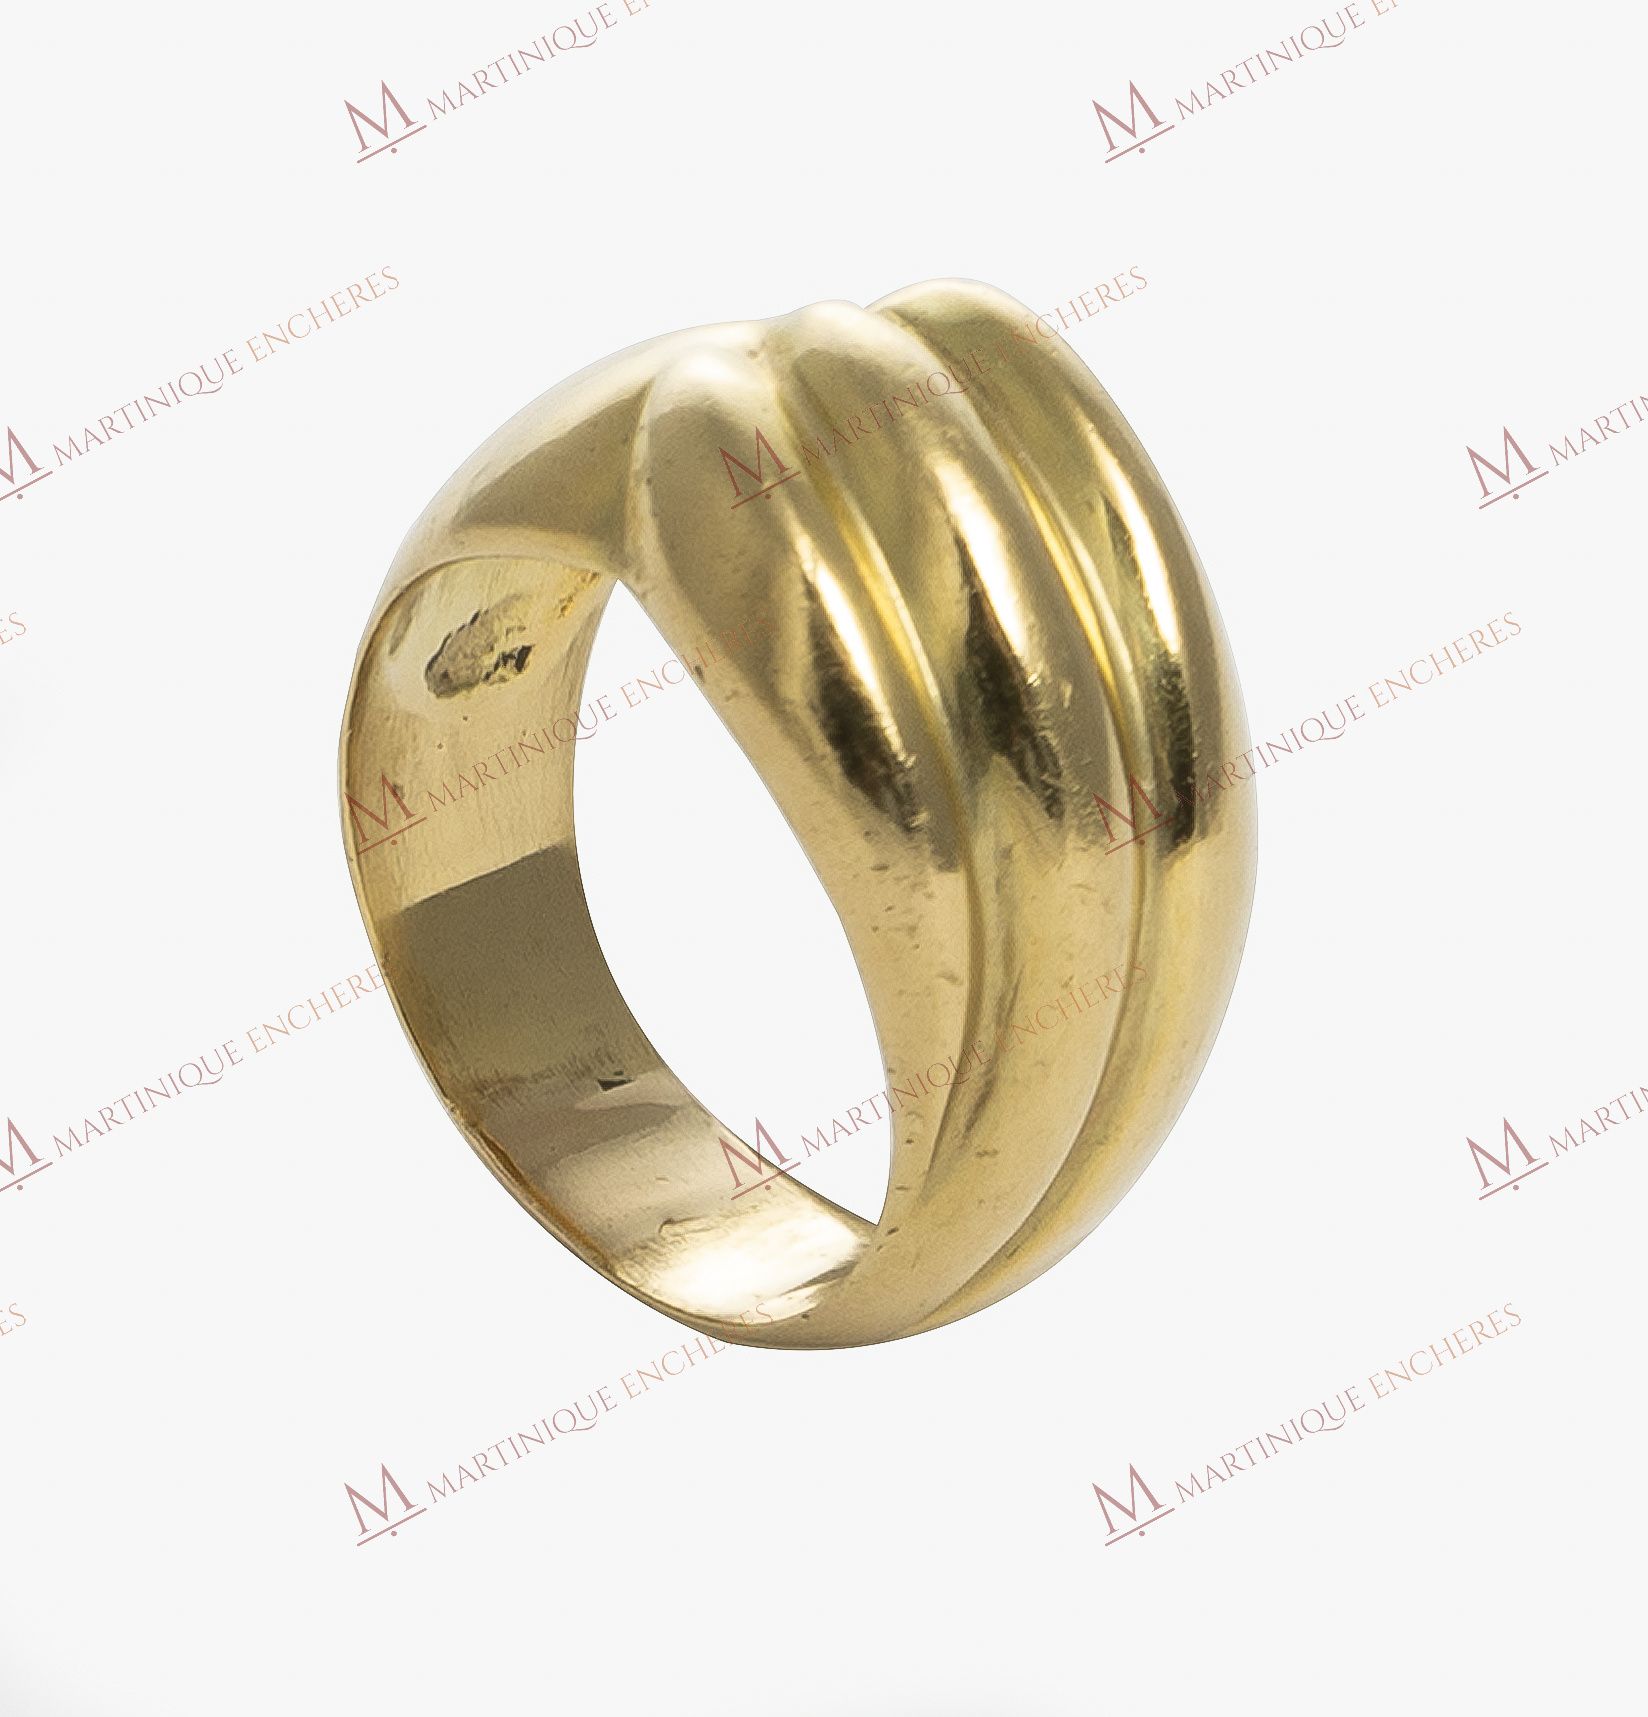 Null Ring godron in yellow gold 750 thousandths 18K.
Weight : 5,48 g.
TDD 61.